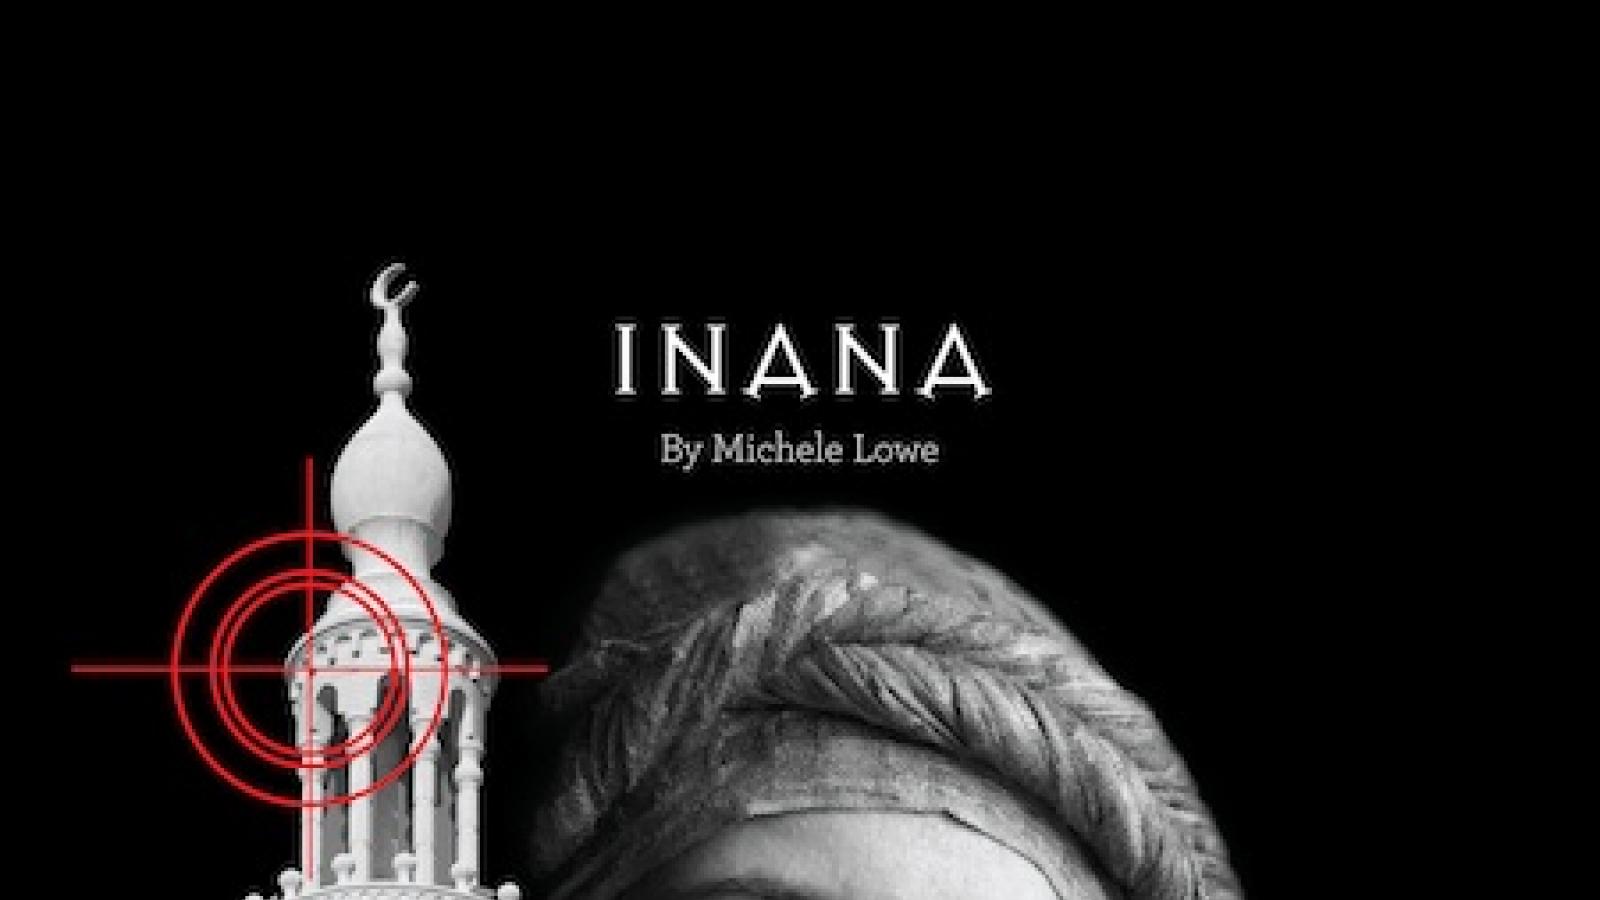 Michele Lowe's "Inana" was one of five plays in repertory during the 2010 Contemporary American Theater Festival in Shepherdstown, West Virginia. Photo courtesy CATF